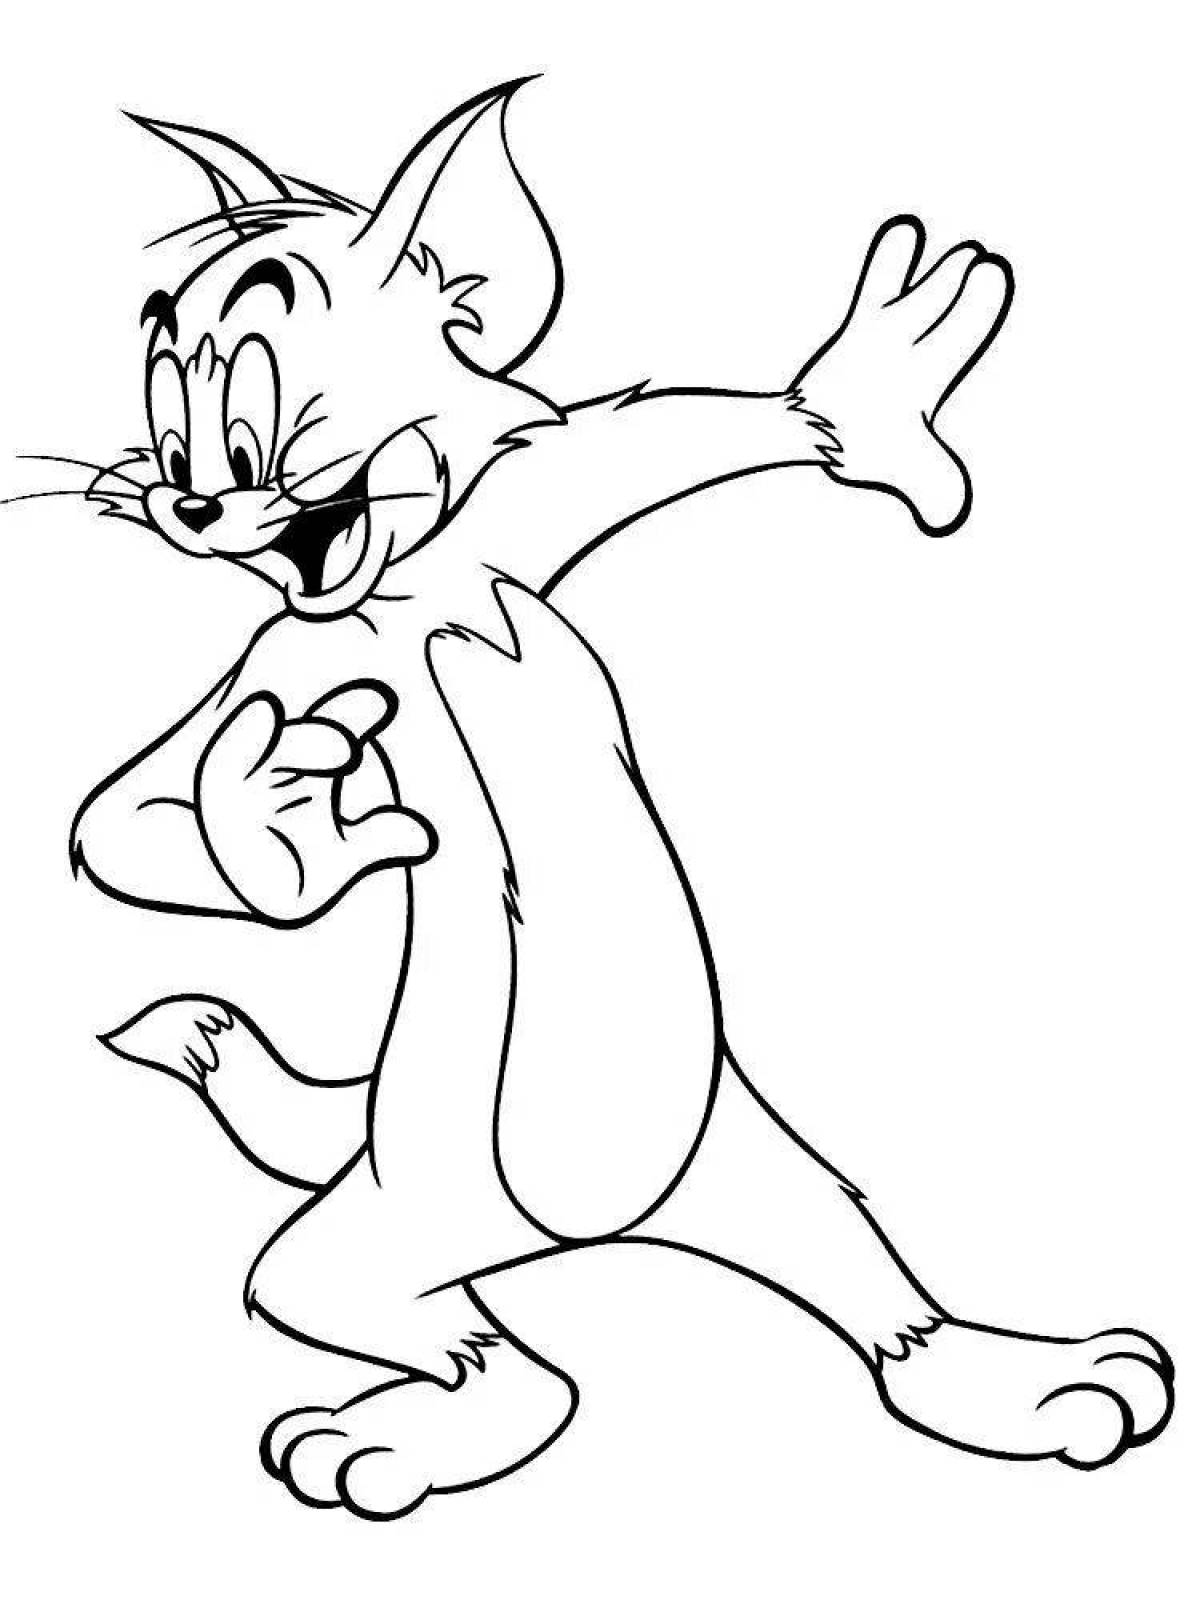 Great tom and jerry coloring book